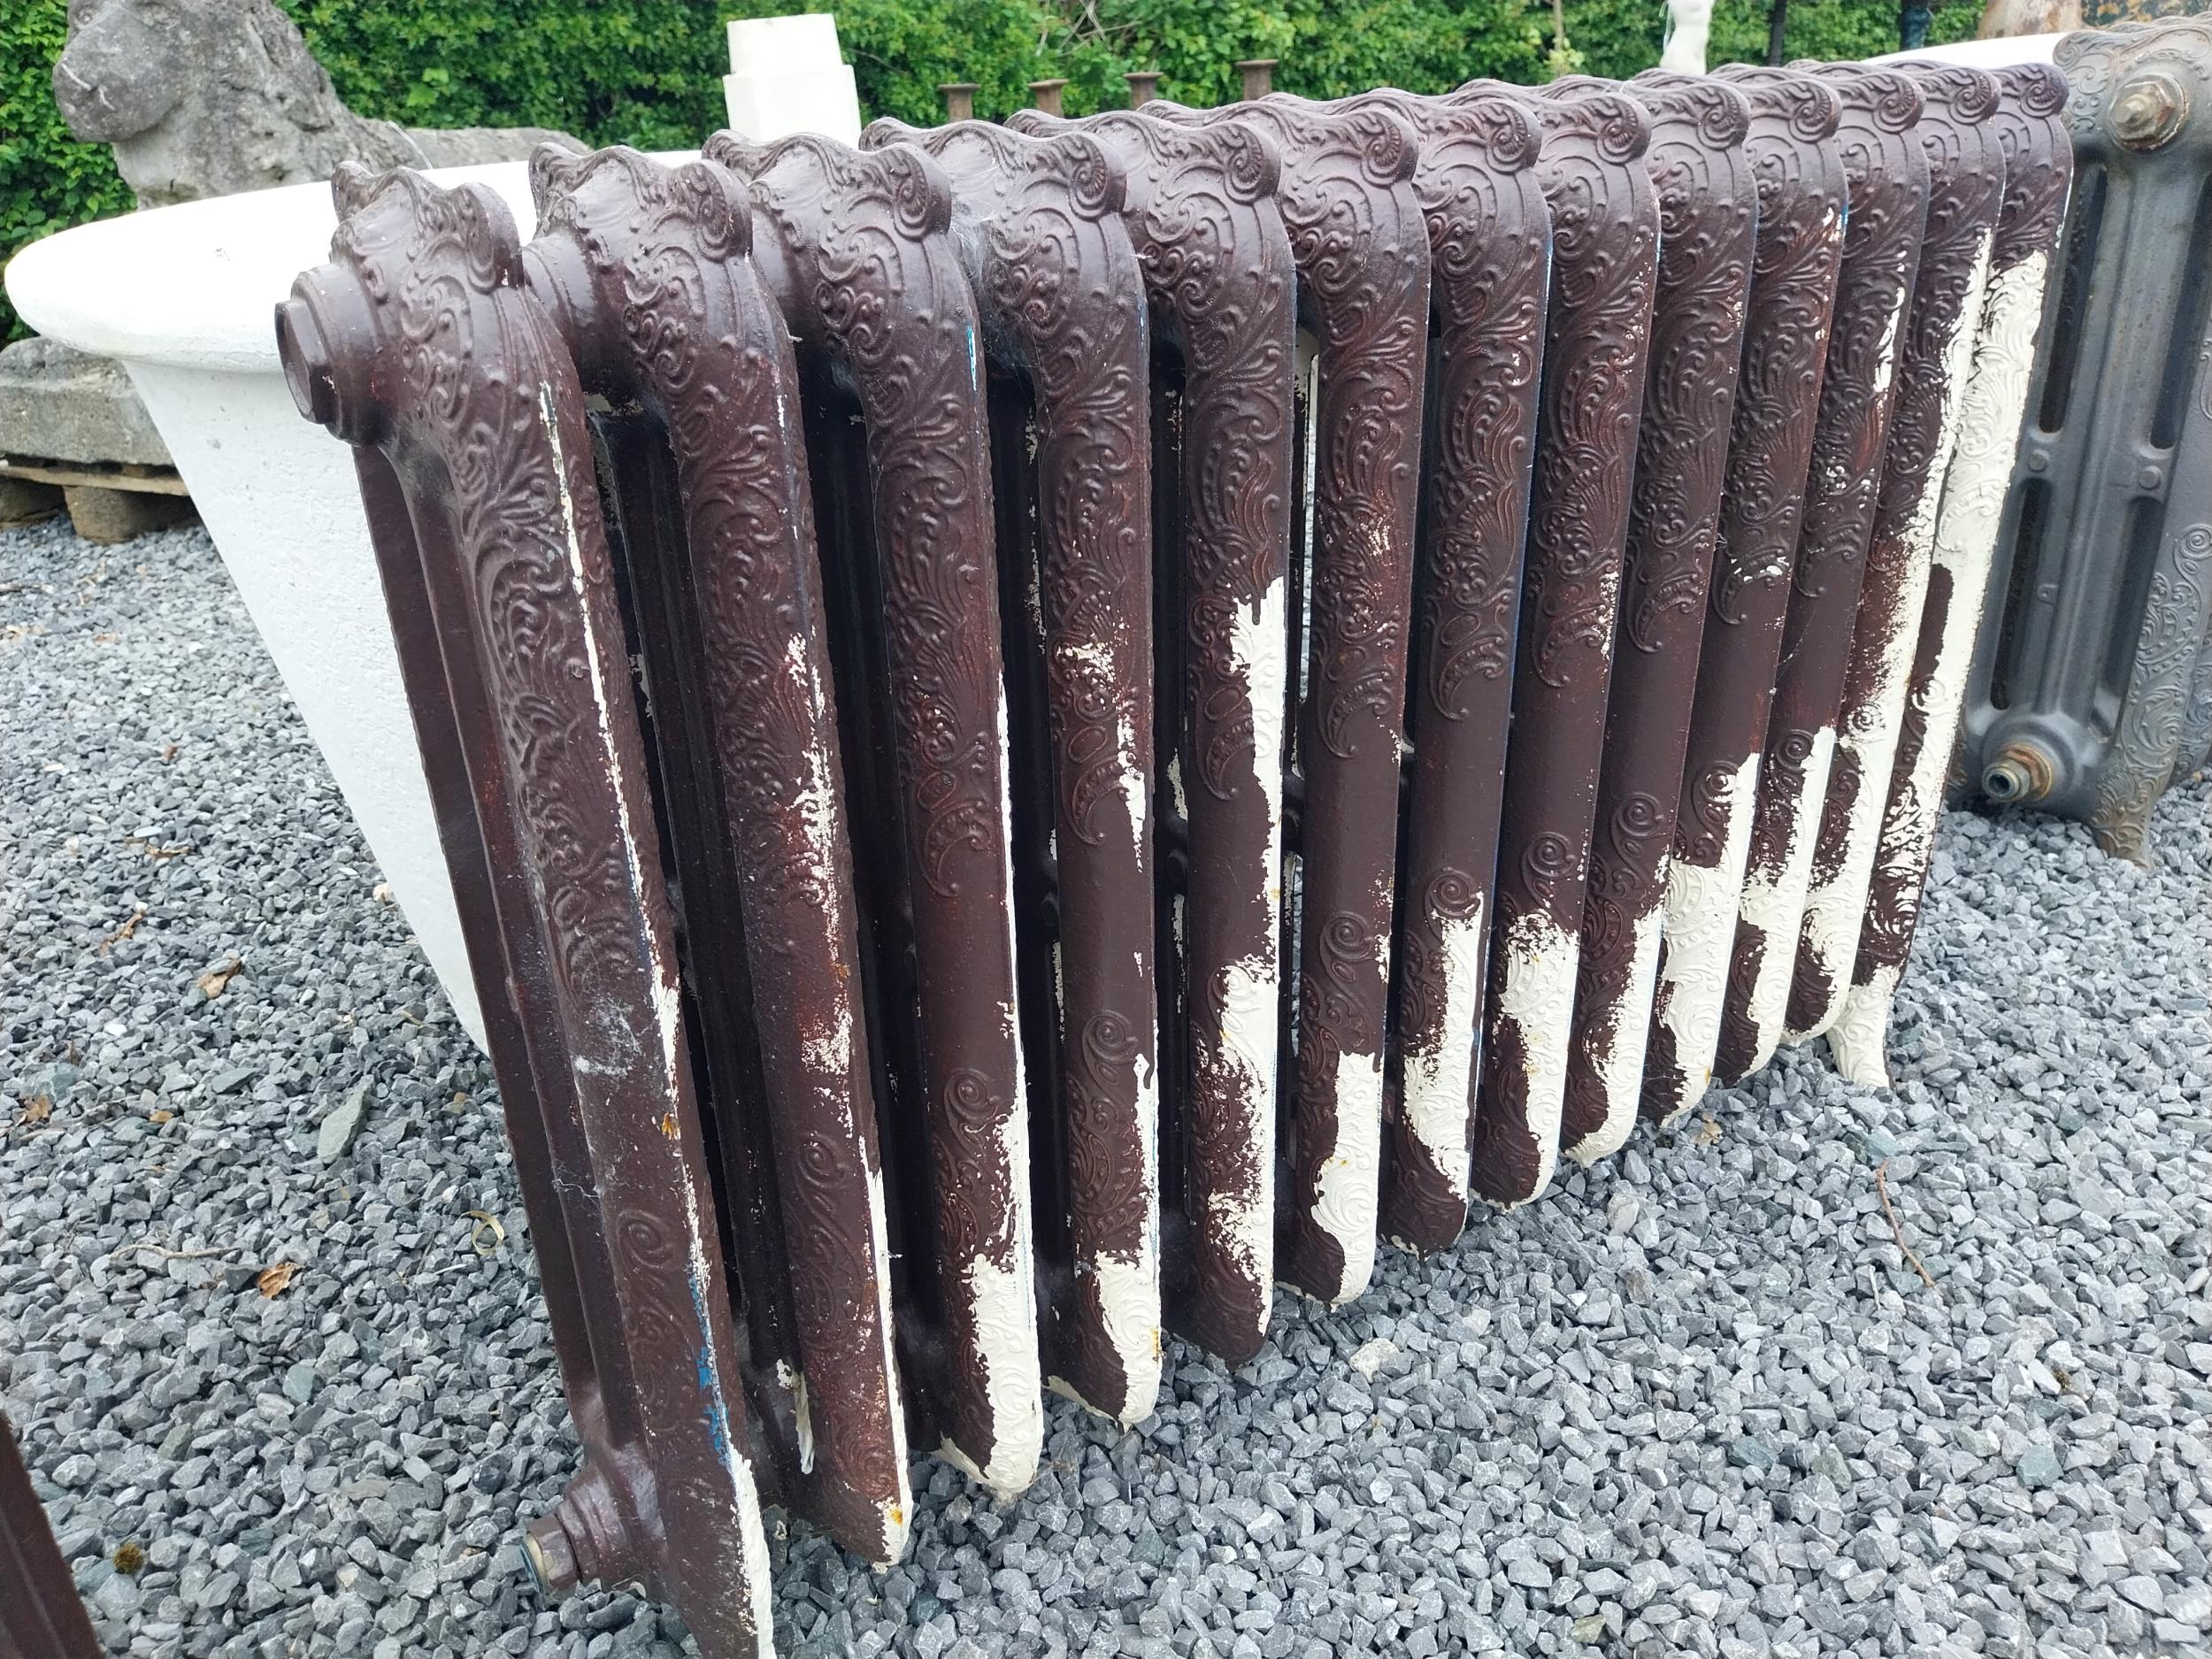 Two decorative cast iron radiators in the Victorian style - taken out working {74 cm H x 108 cm W - Image 3 of 3